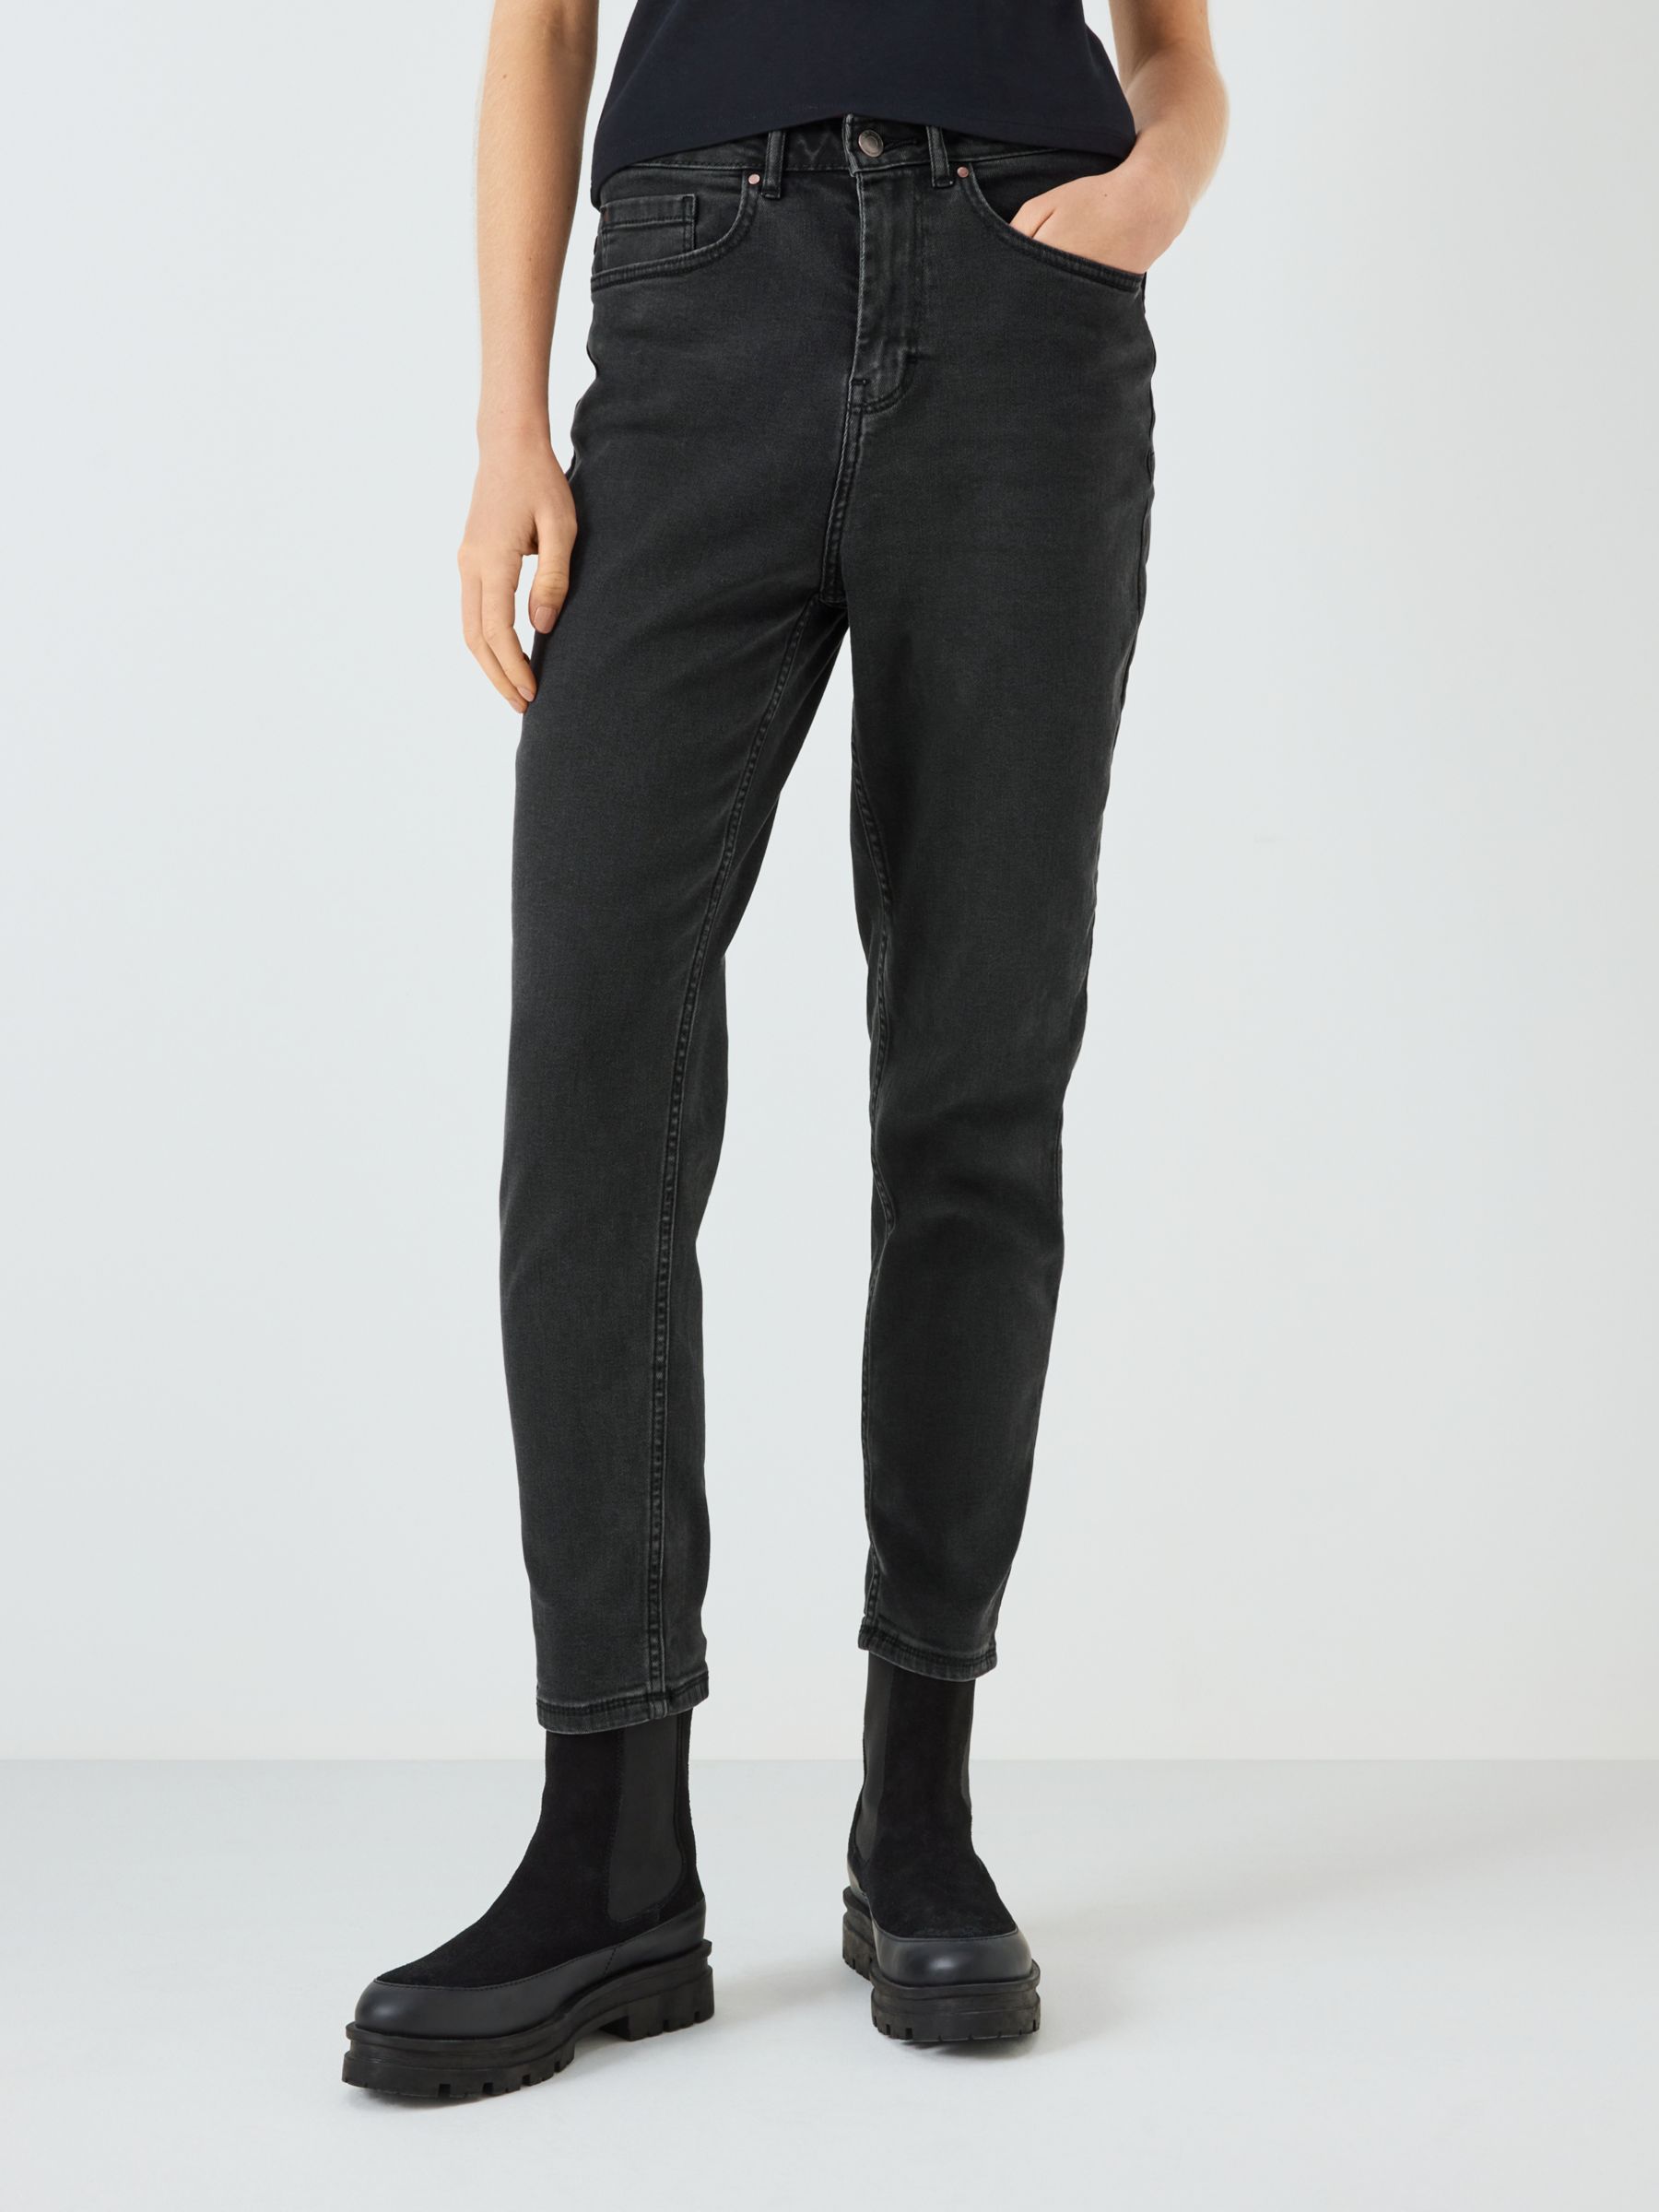 Topshop Petite faux leather straight leg trouser in black, £46.00